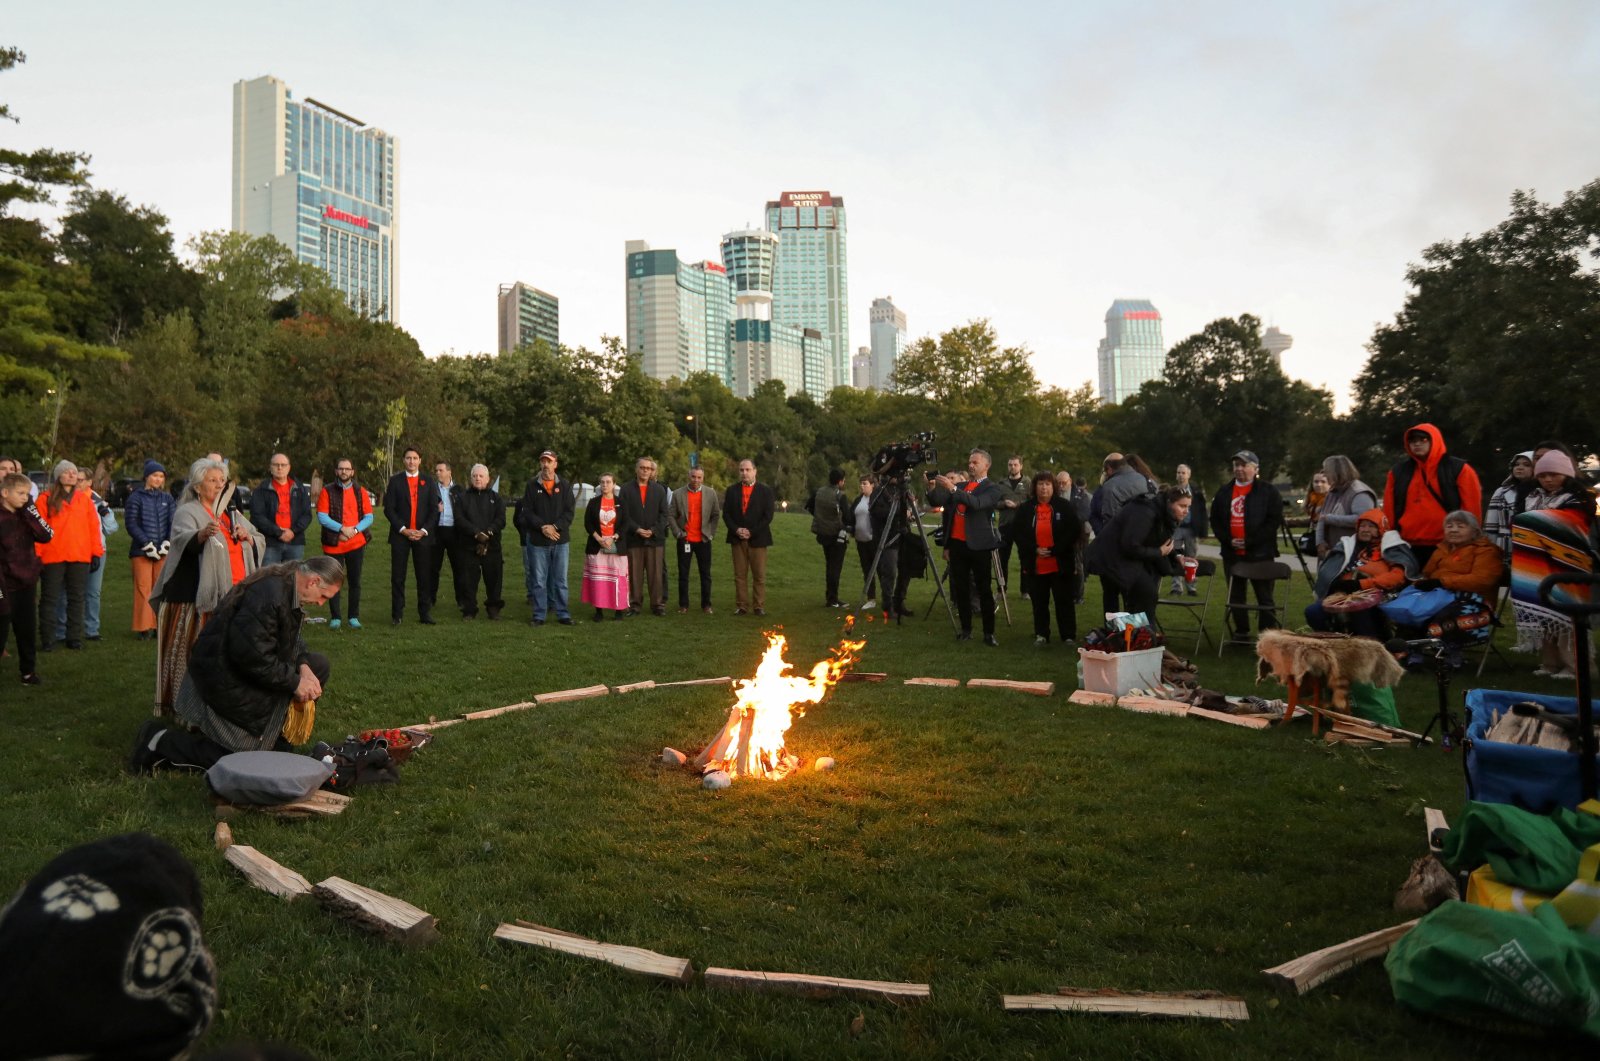 Canada&#039;s Prime Minister Justin Trudeau marks National Day for Truth and Reconciliation, honoring the lost children and survivors of Indigenous residential schools, during a sunrise ceremony at Niagara Parks power station, Ontario, Canada, Sept. 30, 2022.  (Reuters File Photo)